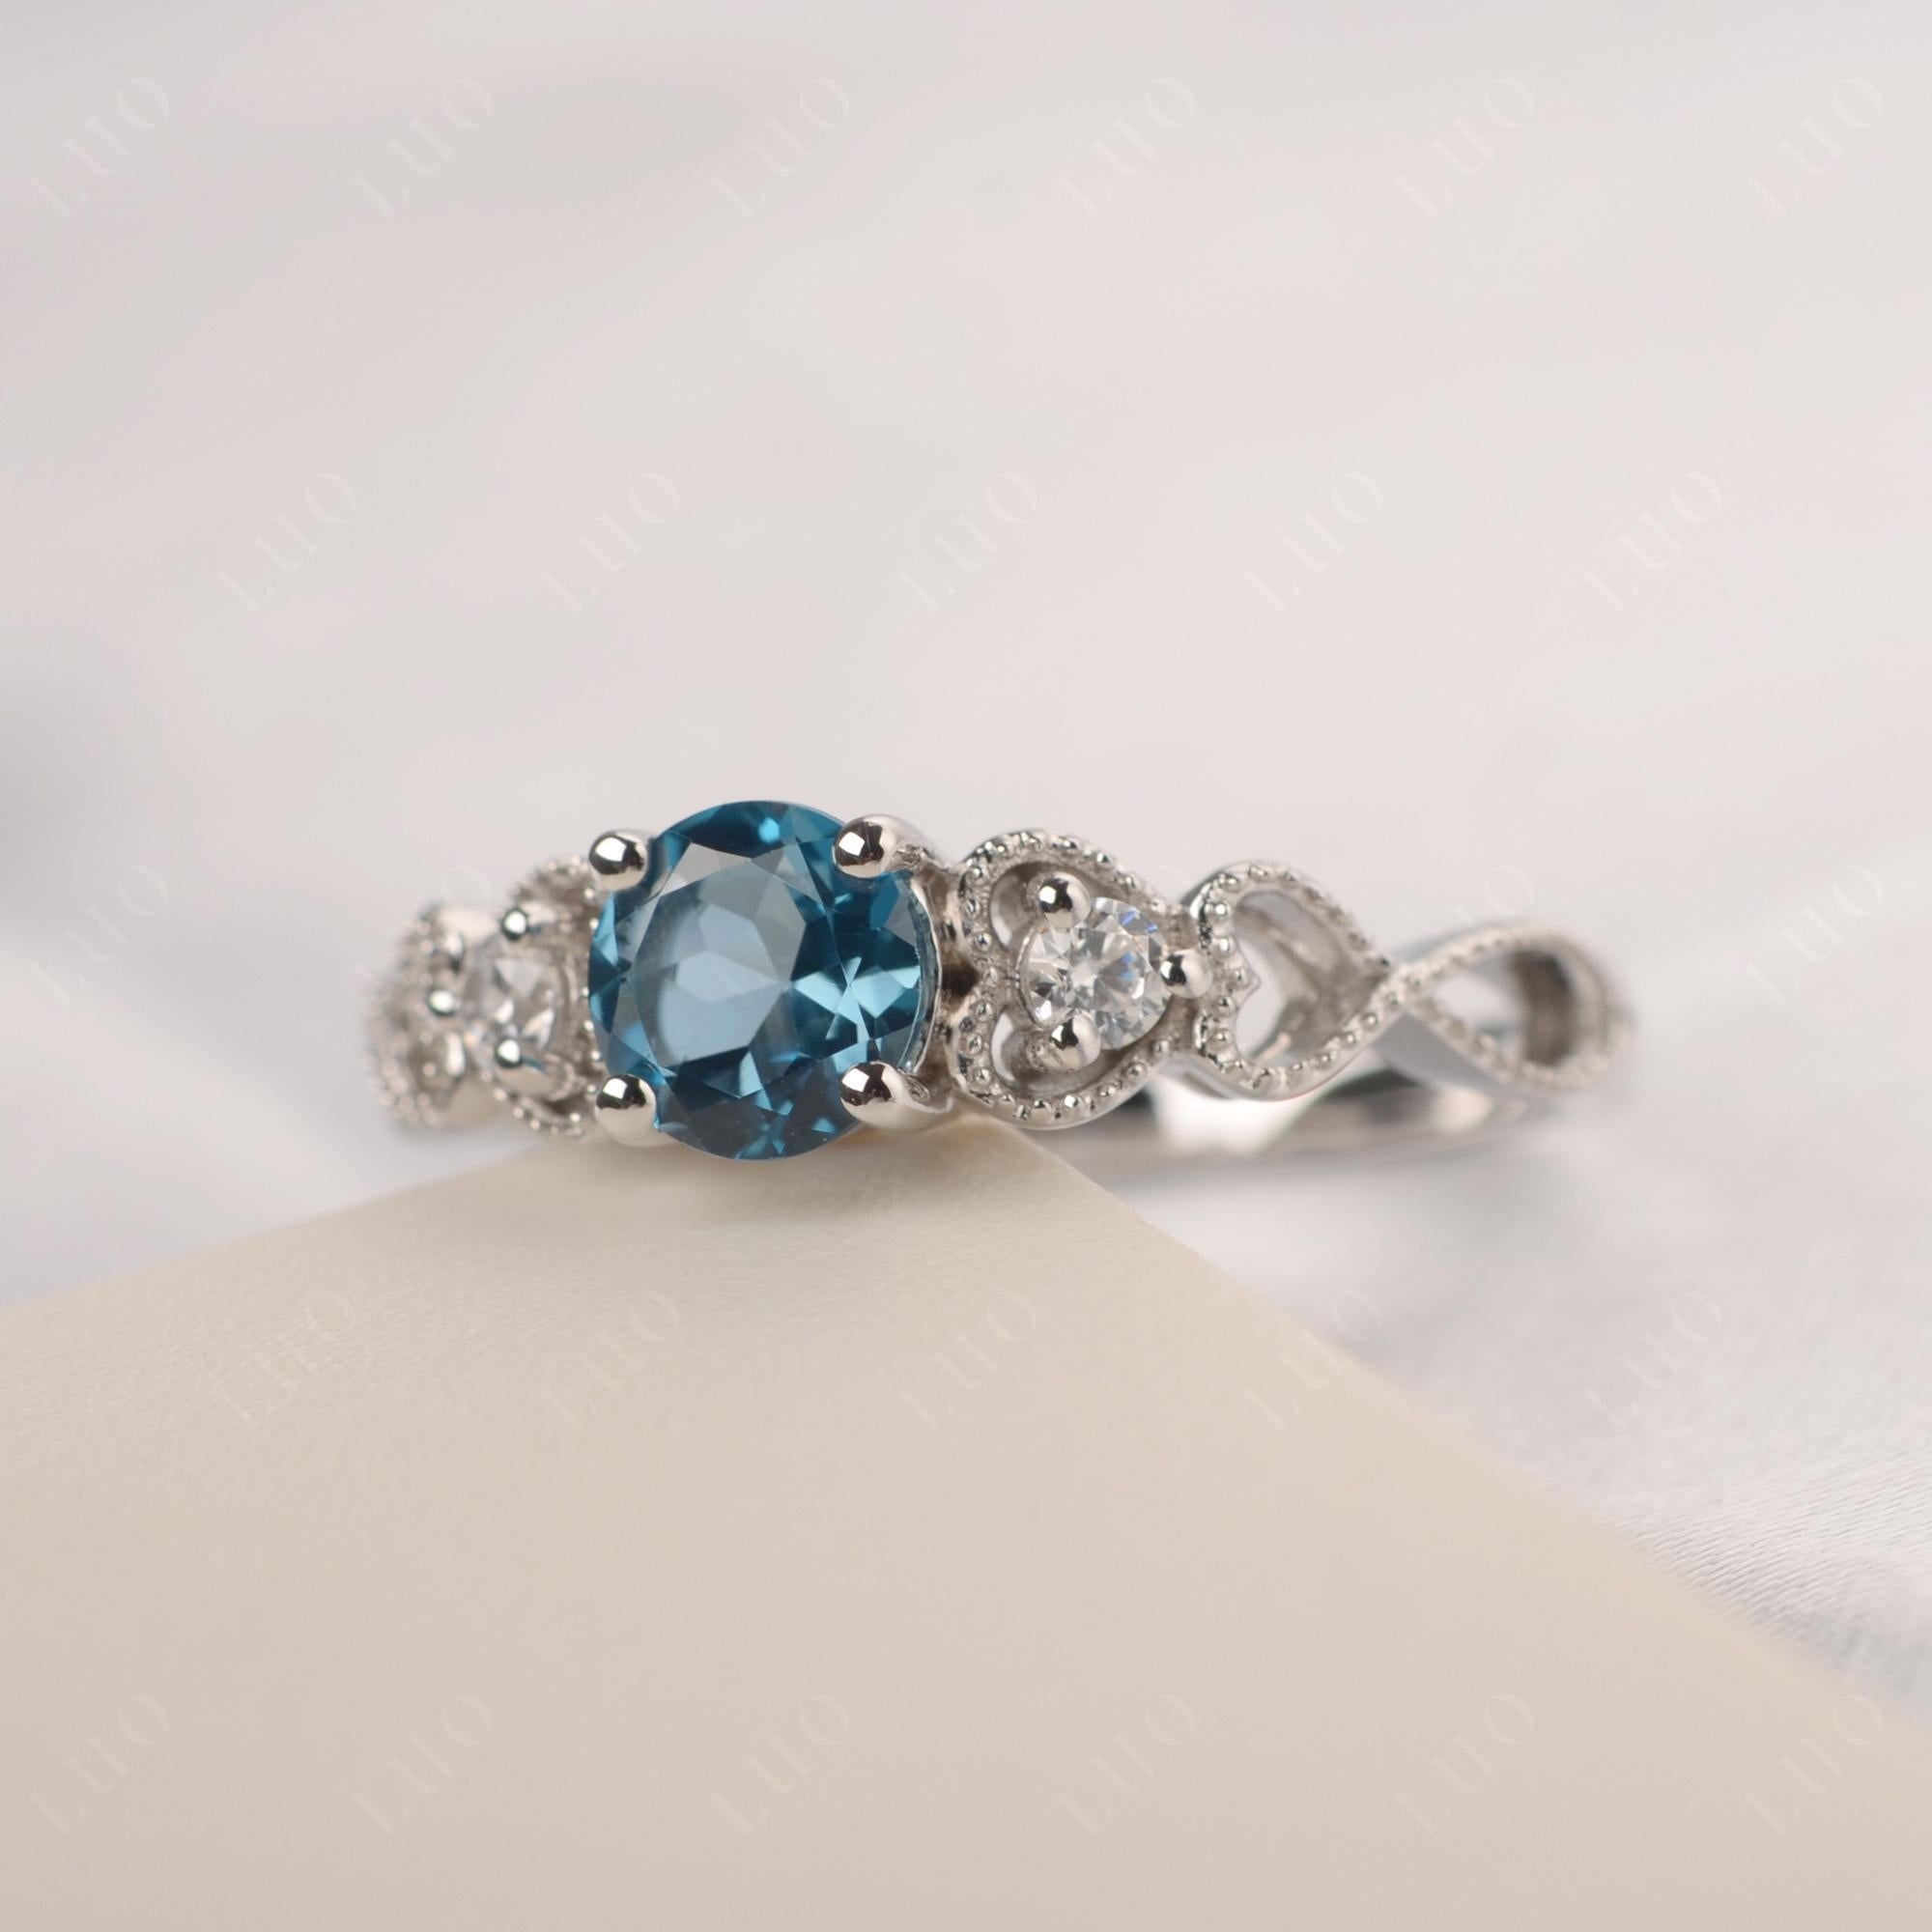 London Blue Topaz Vintage Style Engagement Ring - LUO Jewelry